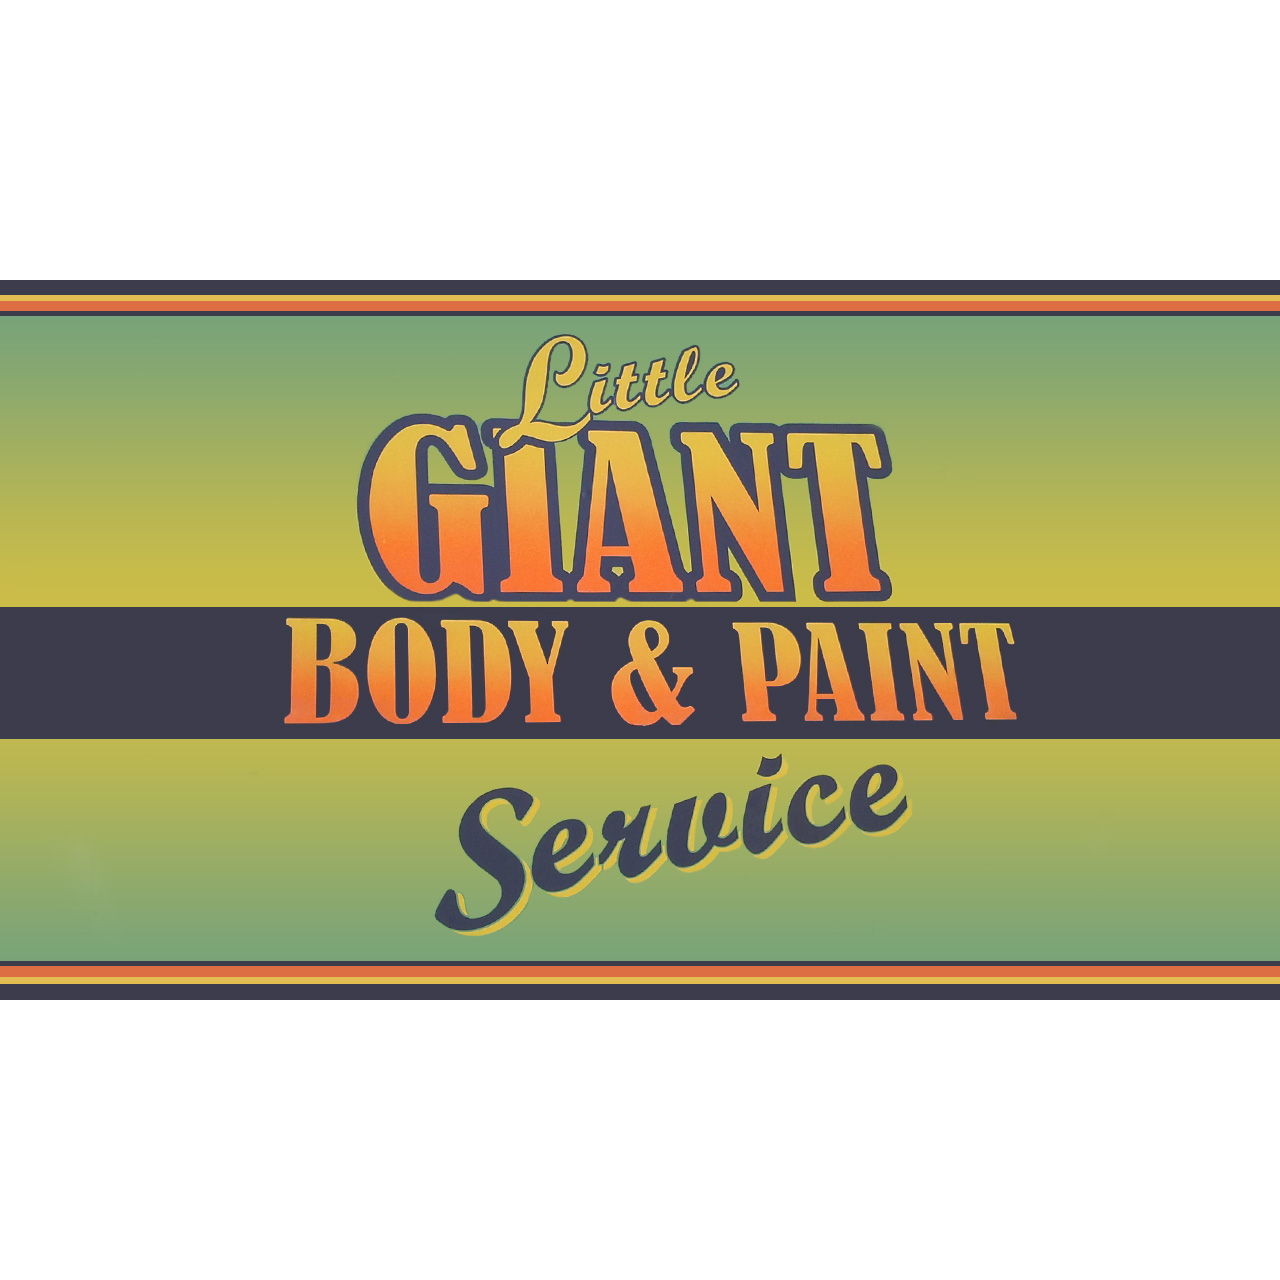 Little Giant Body & Paint - Dayton, OH 45419 - (937)299-6363 | ShowMeLocal.com